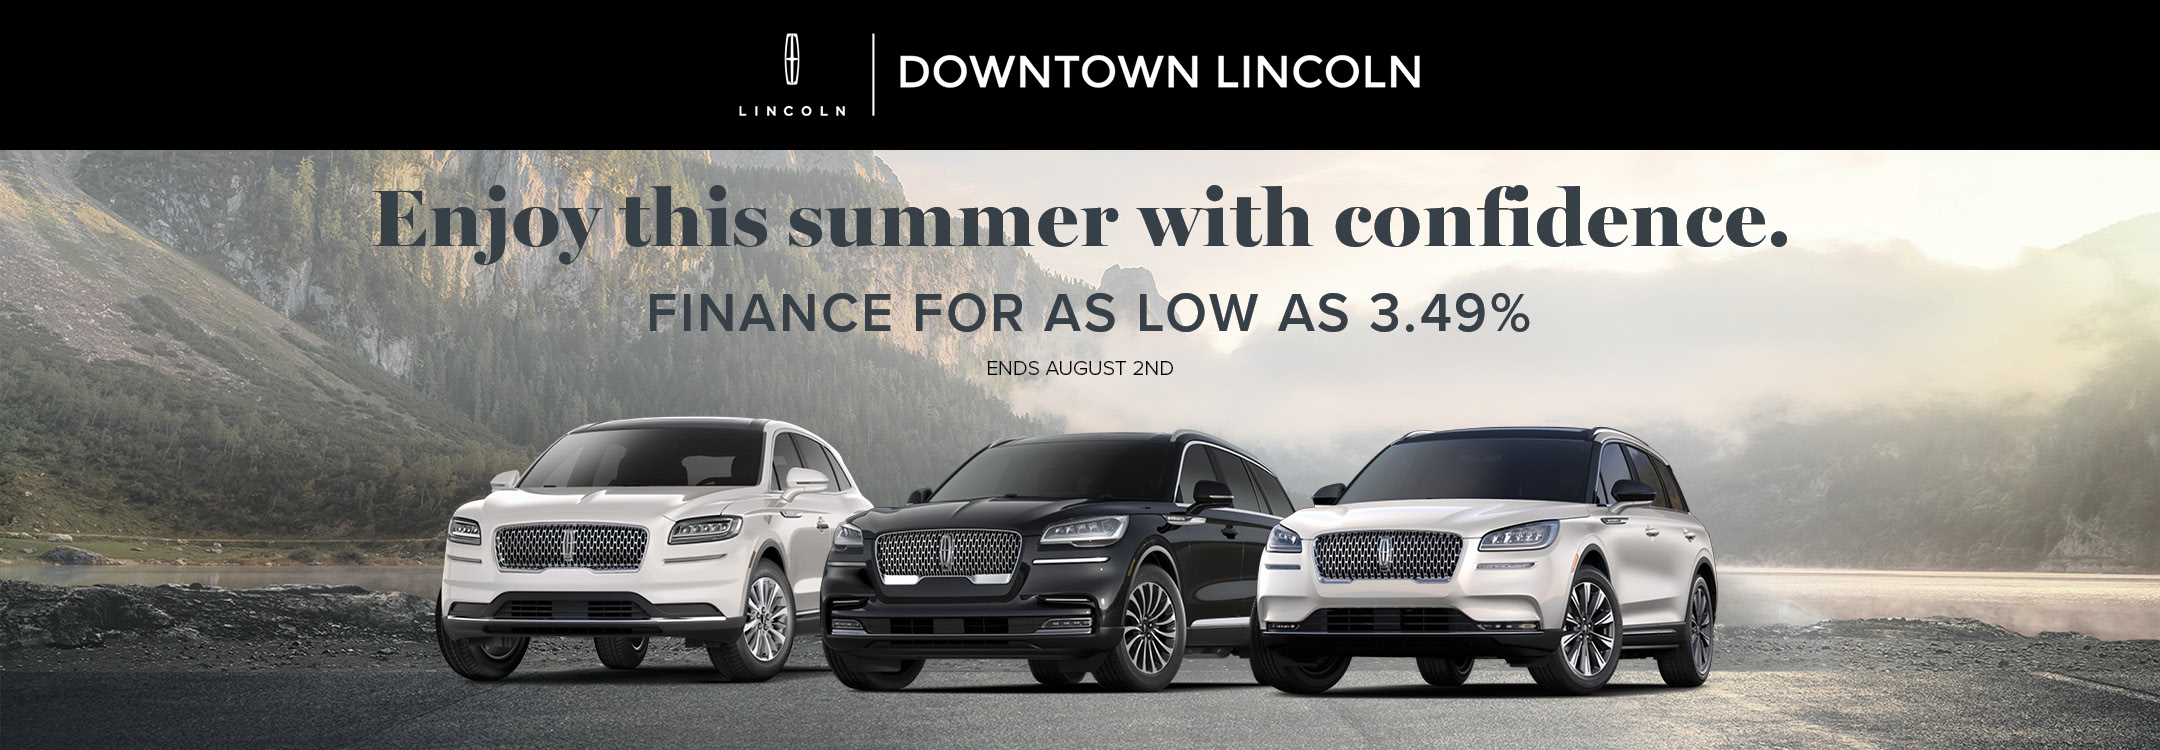 Special Offers at Downtown Lincoln in Toronto, ON